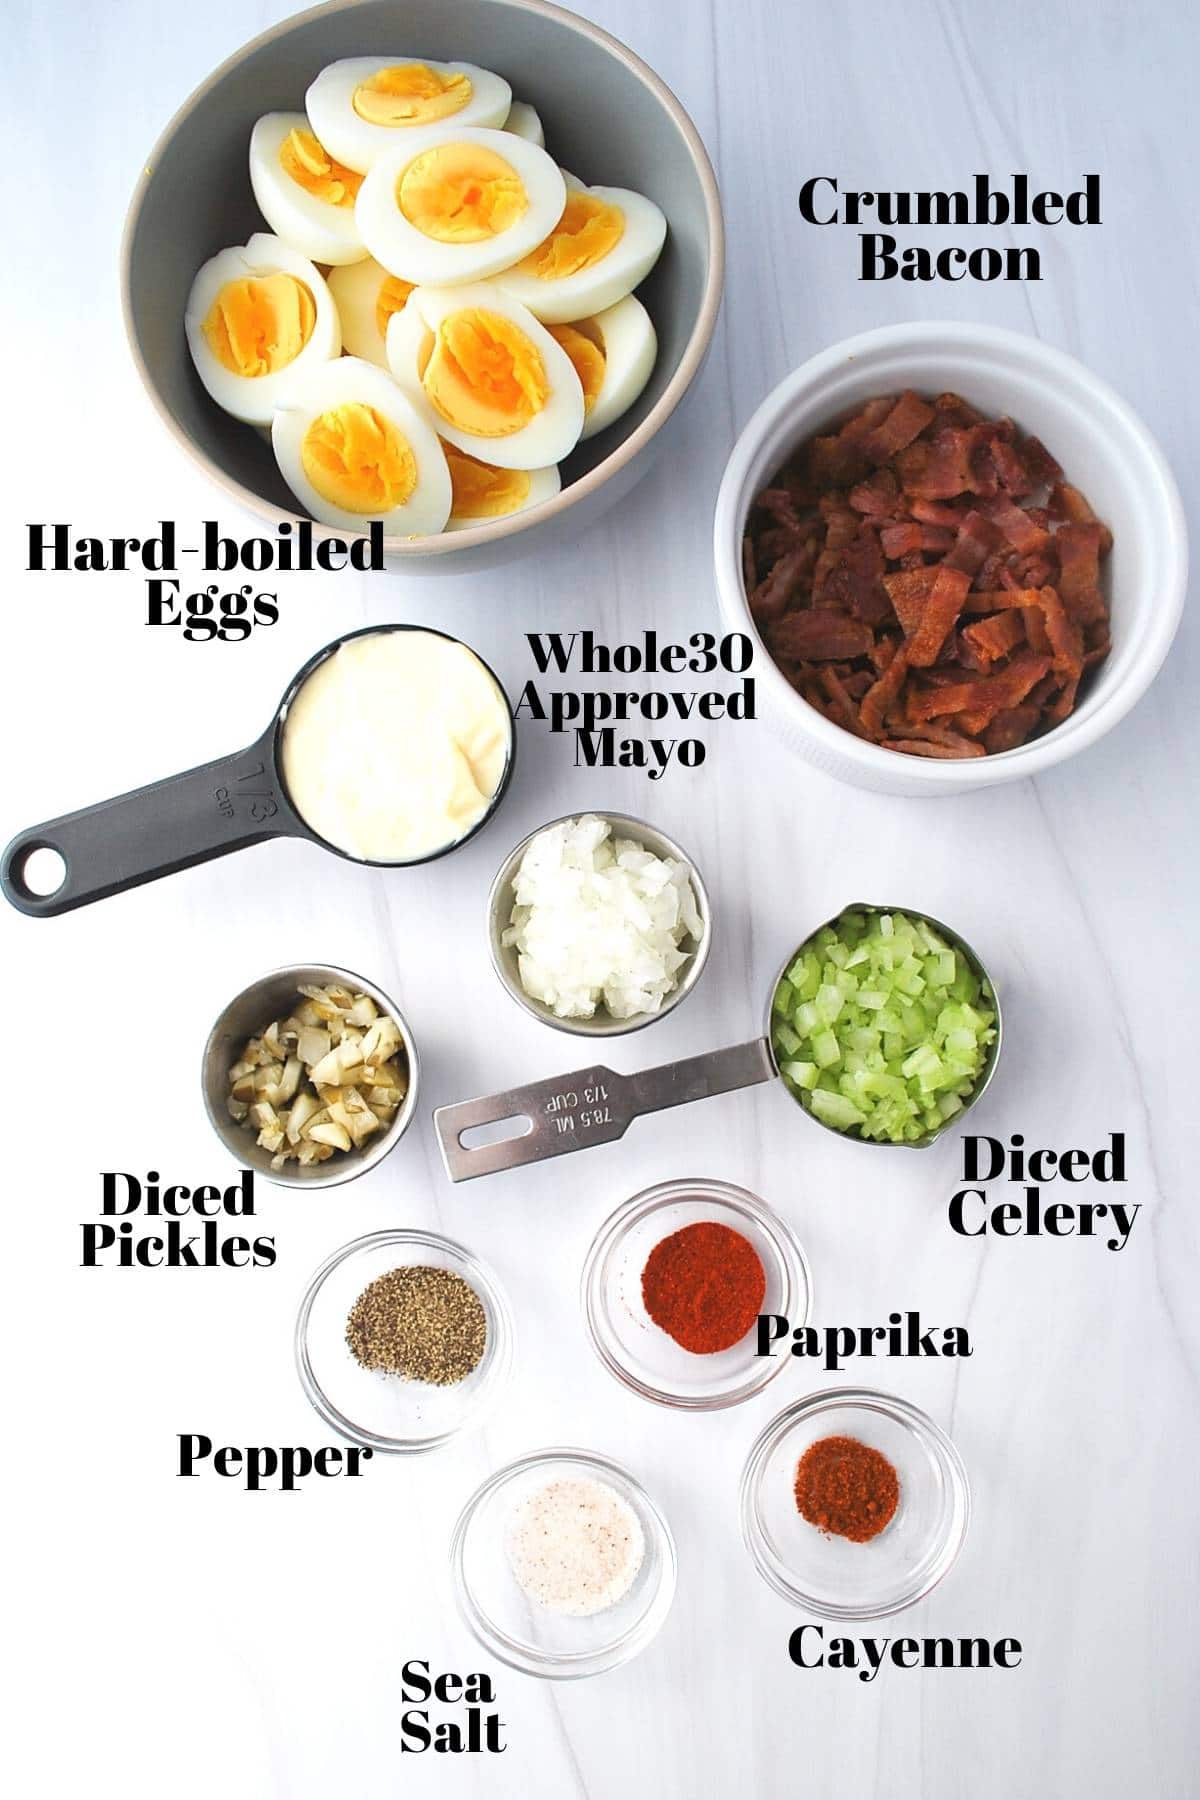 ingredients for whole30 egg salad in measured amounts on a counter